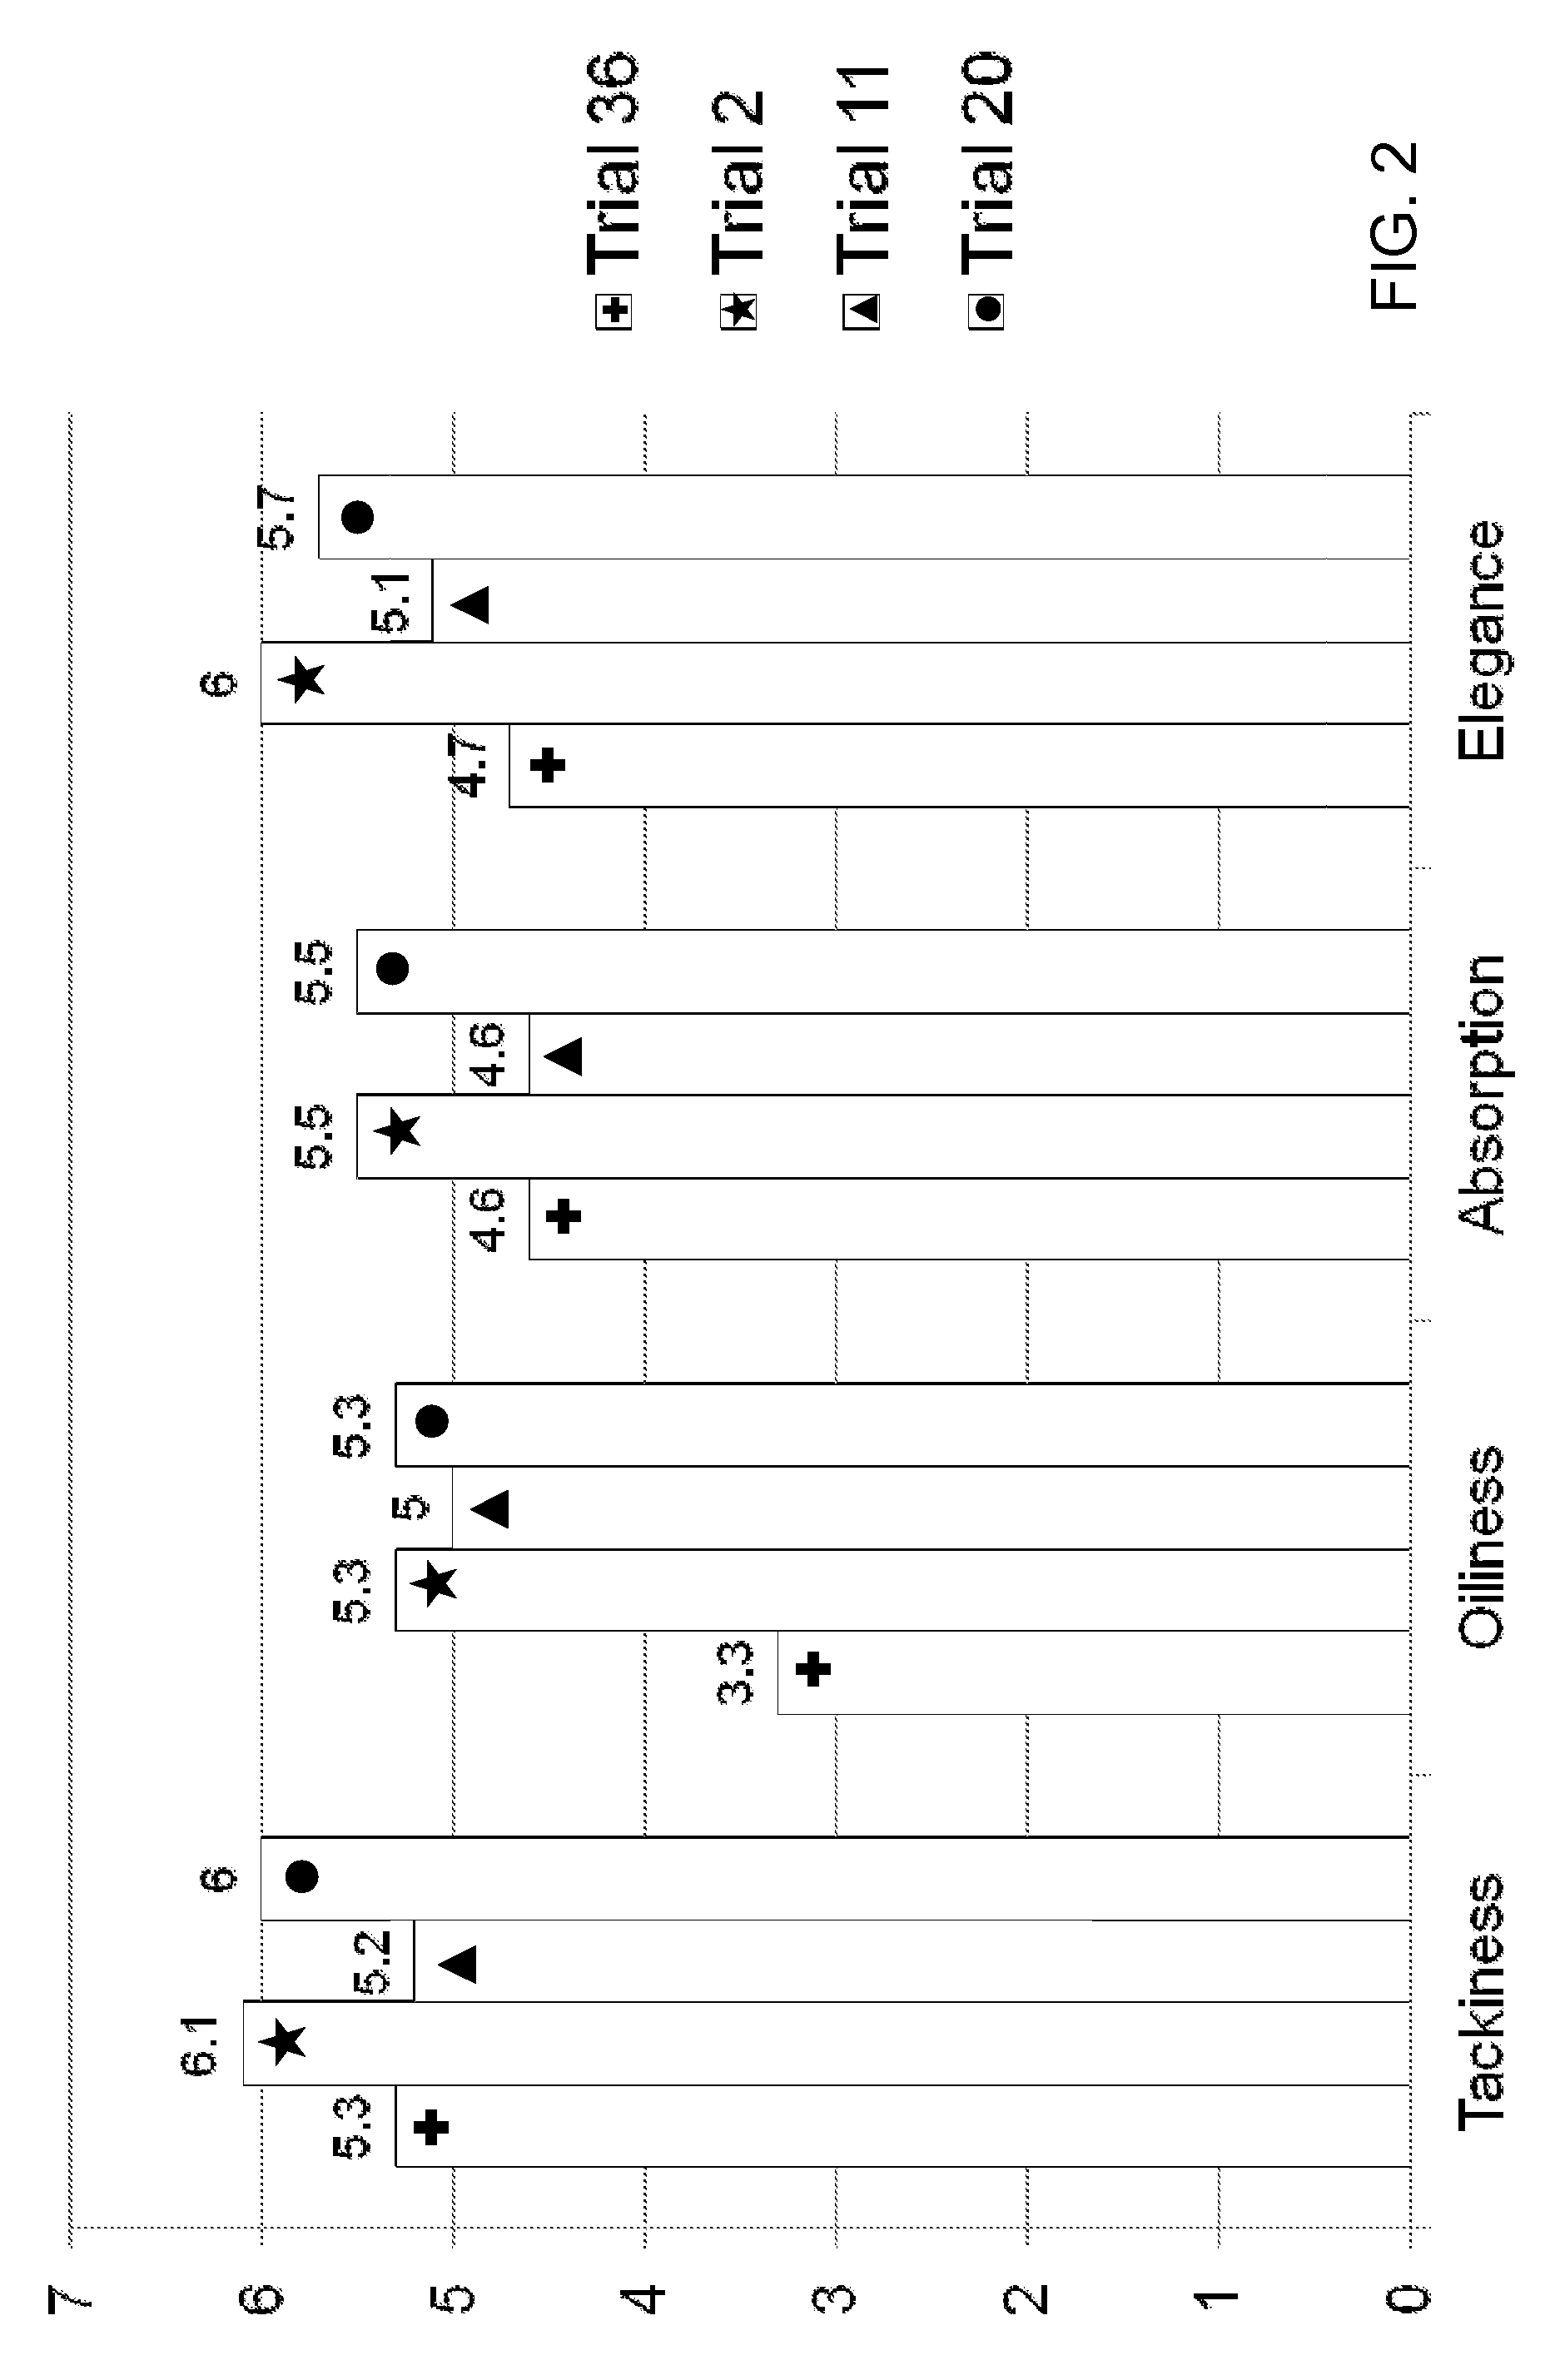 Pharmaceutical cream compositions and methods of use